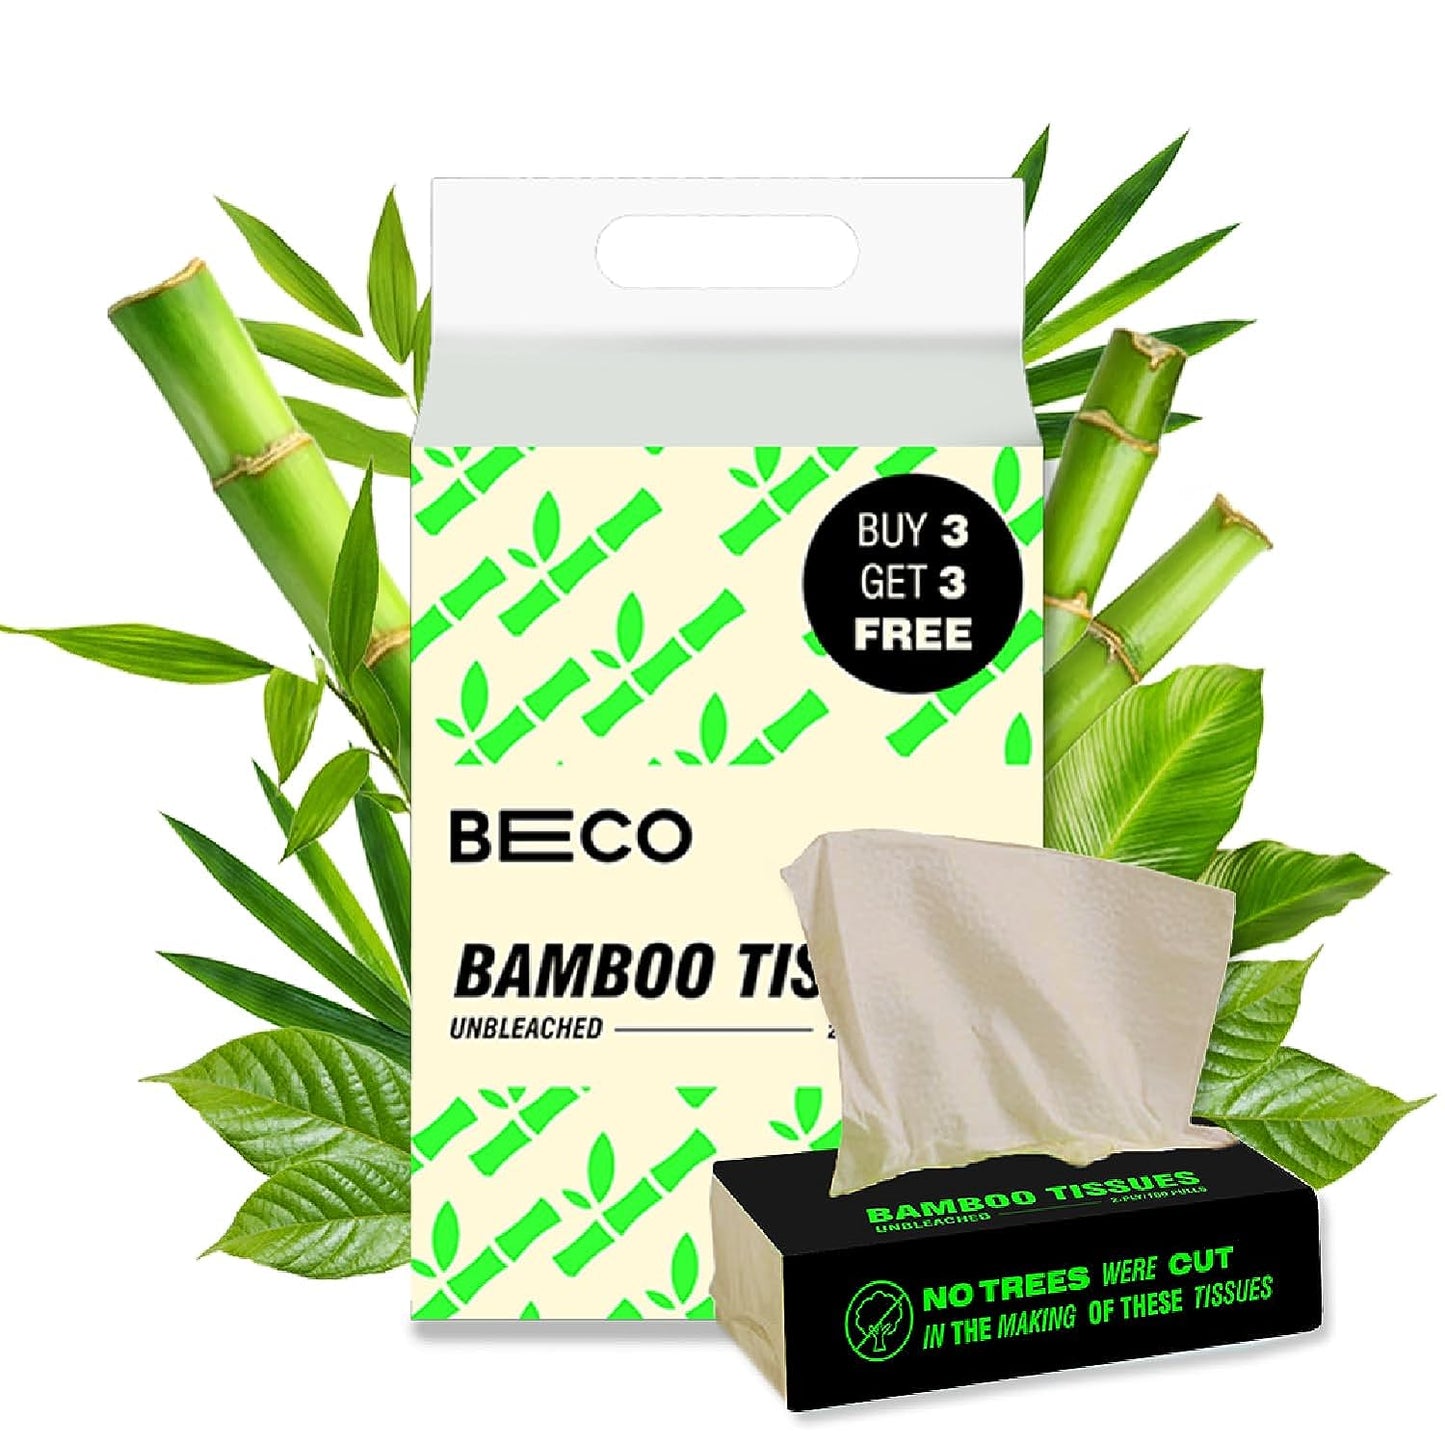 Beco Bamboo Super Soft Facial Tissue 100 Pulls (Pack of 6), 600 Pulls 2 ply 100% Natural and Ecofriendly